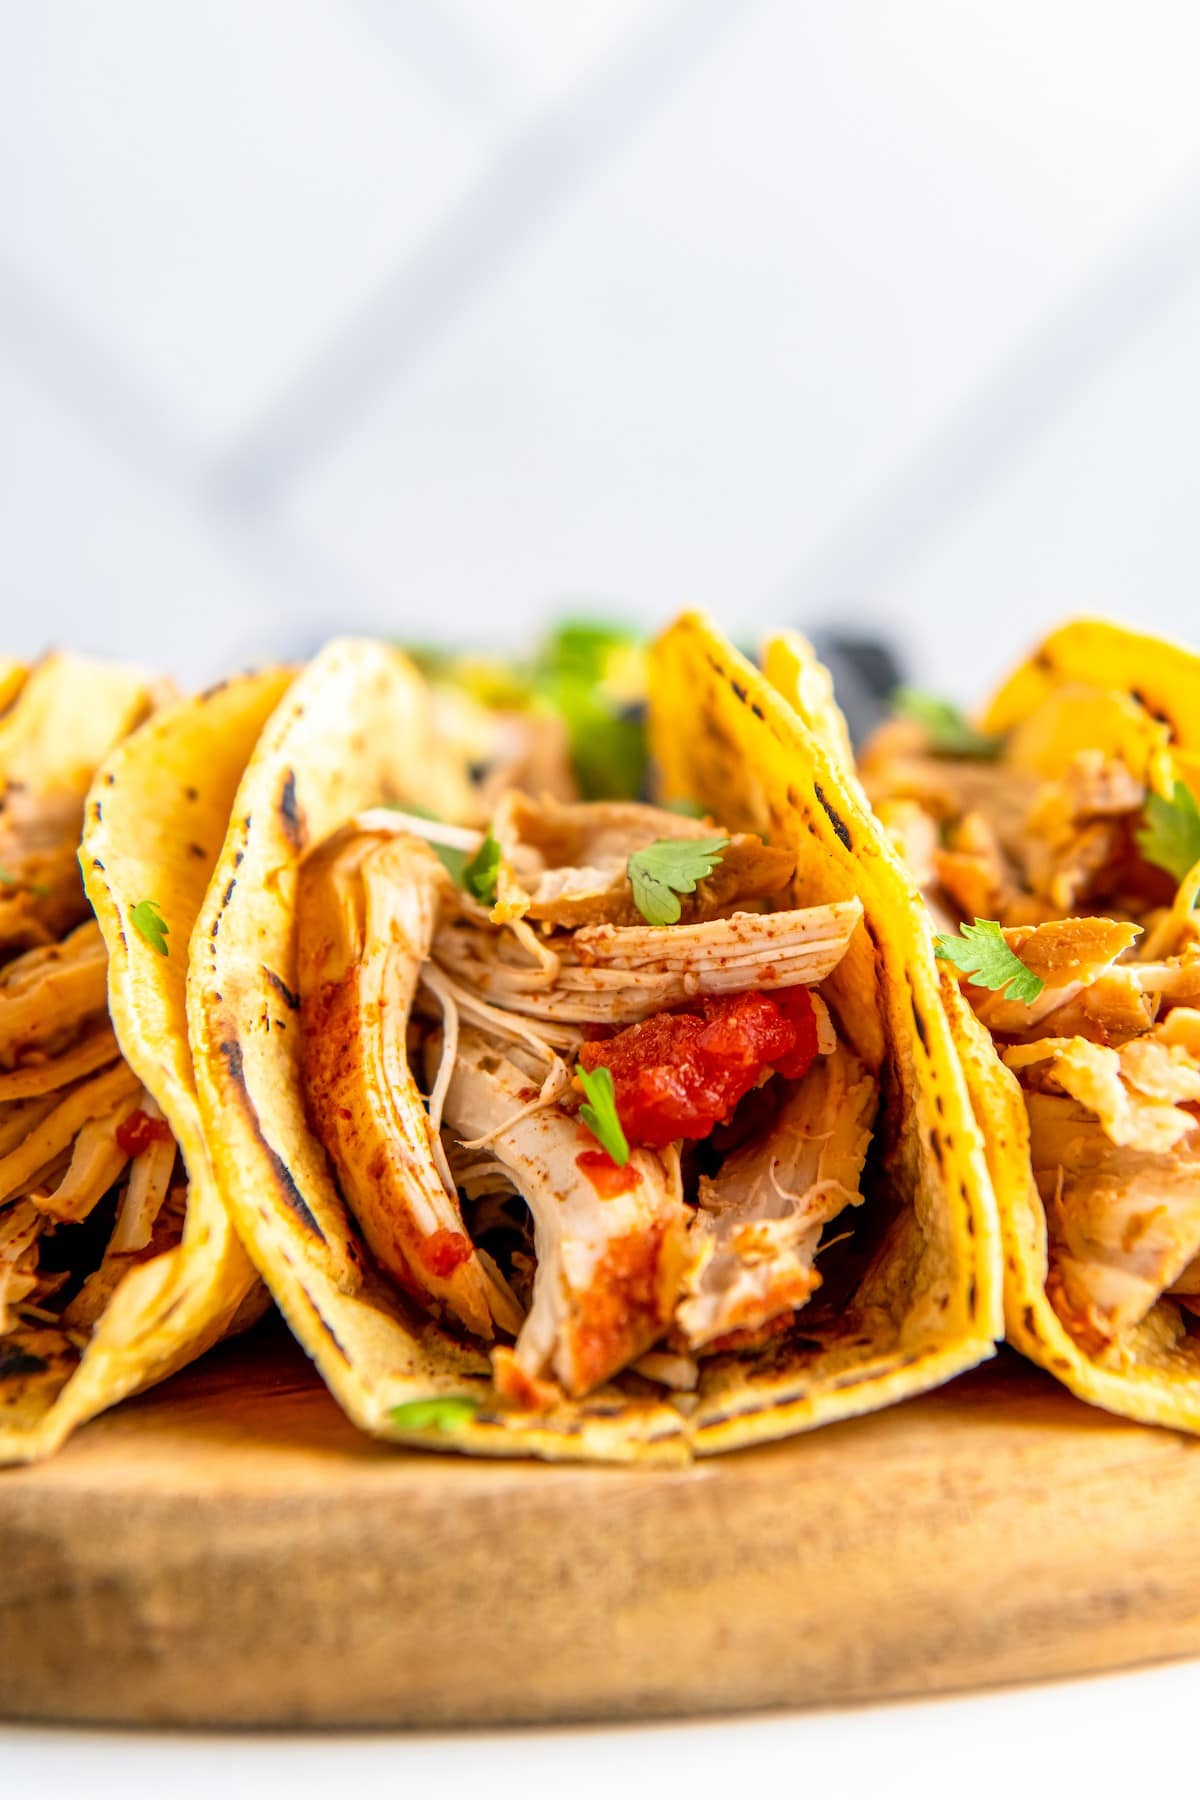 Tortillas filled with shredded chicken and tomatoes.